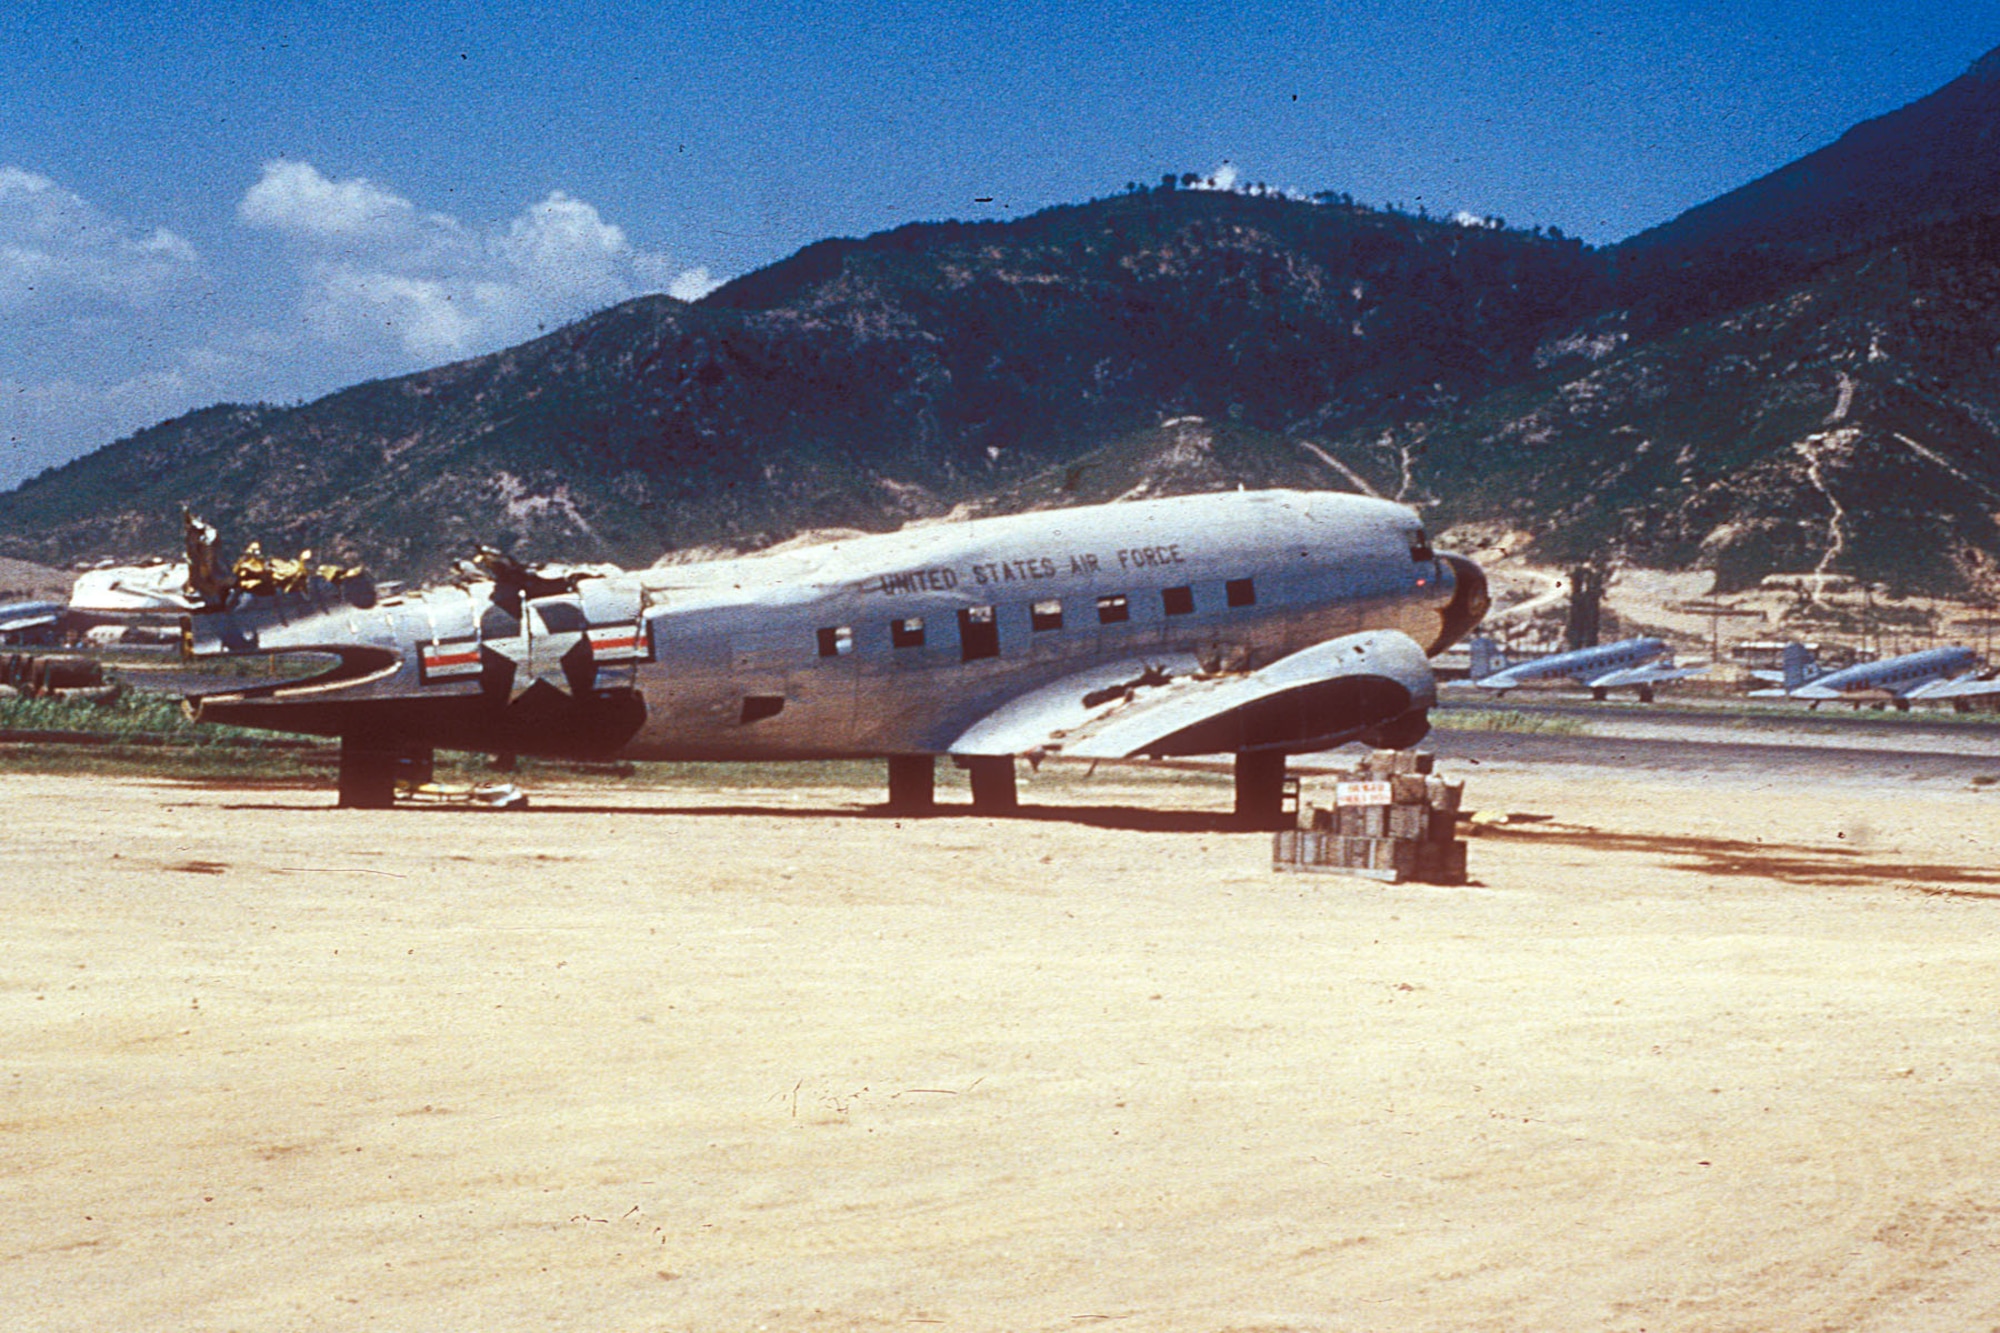 Damaged aircraft like this C-47 were often stripped for parts to keep others flying. (U.S. Air Force photo)